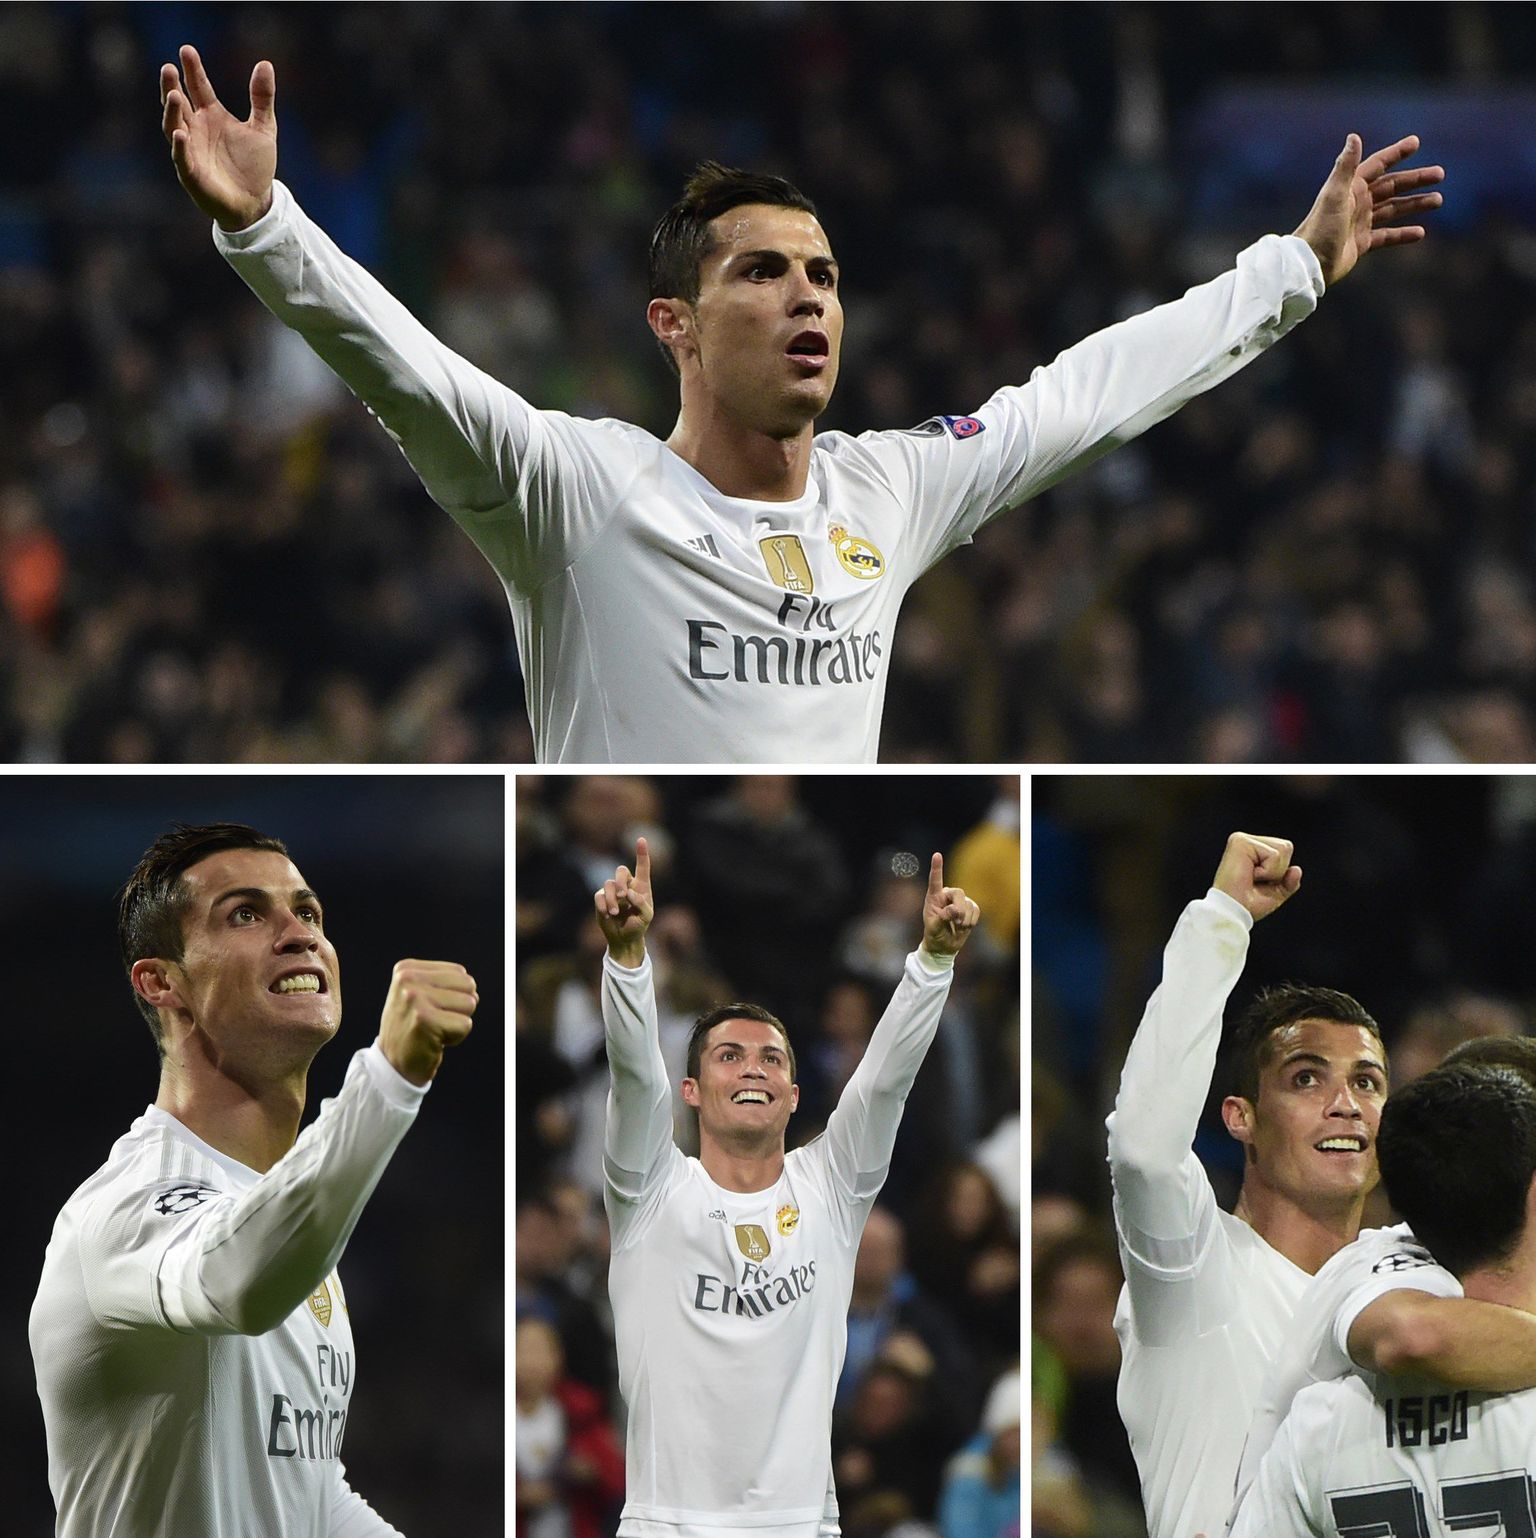 A combination of four pictures taken on December 8, 2015 shows Real Madrid's Portuguese forward Cristiano Ronaldo celebrating respectively his first (Top), (Bottom FromL) second, third and fourth goal during the UEFA Champions League Group A football match Real Madrid CF vs Malmo FF at the Santiago Bernabeu stadium in Madrid. Benzema did a hat trick as Ronaldo scored 4 goals in a 8-0 victory over Malmo FF.   AFP PHOTO/ PIERRE-PHILIPPE MARCOU